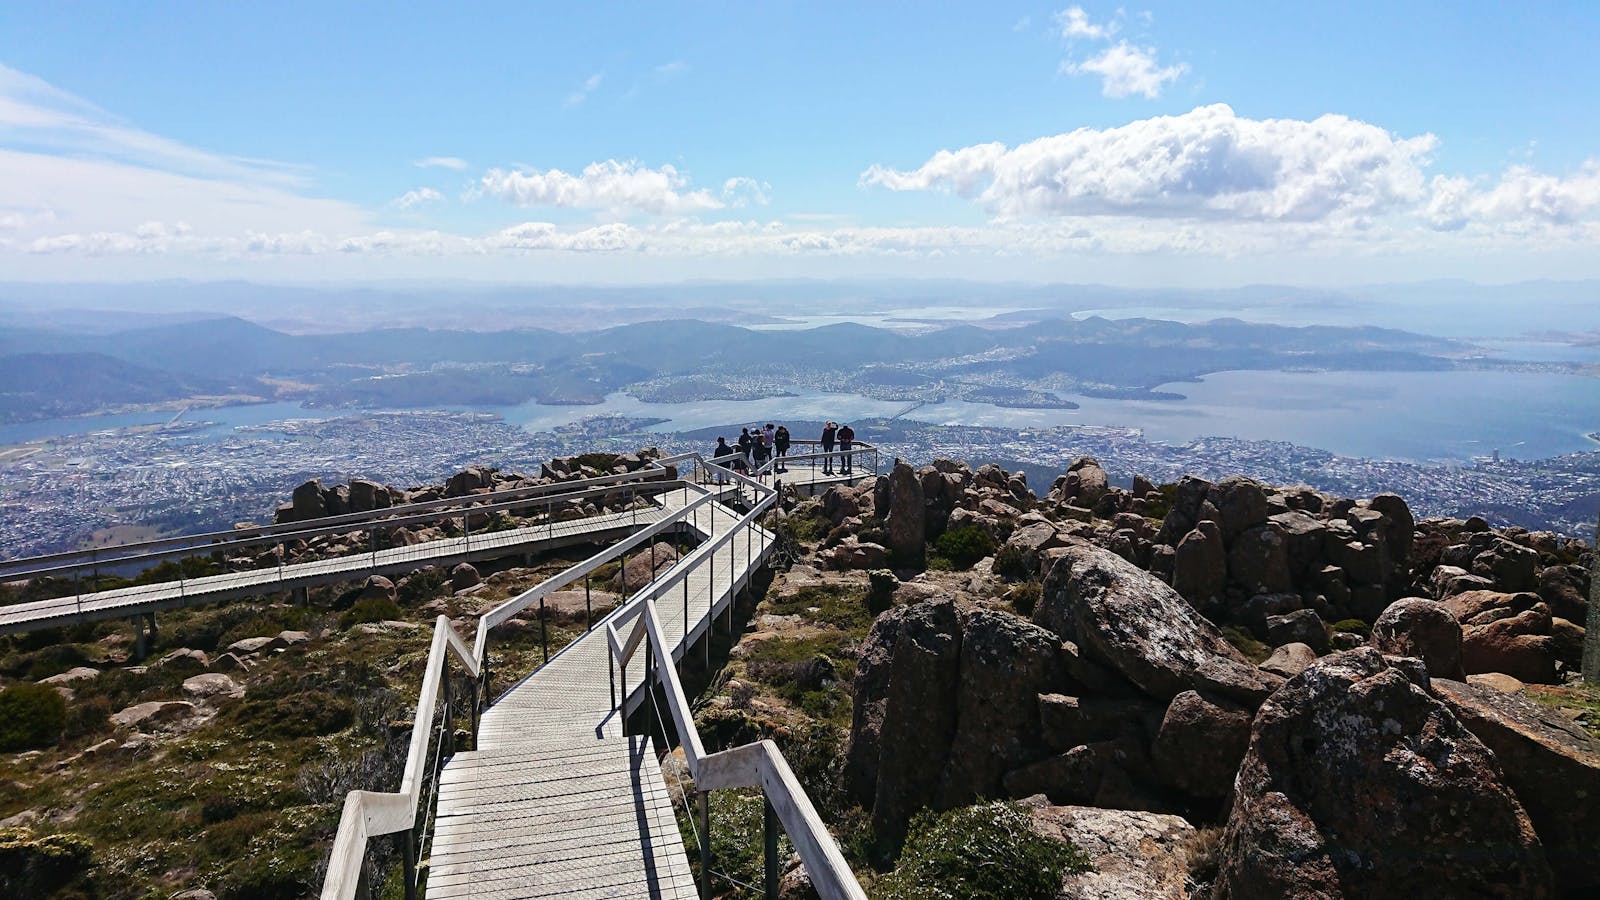 Spectacular views from the lookout at The Pinnacle, kunanyi/Mt Wellington